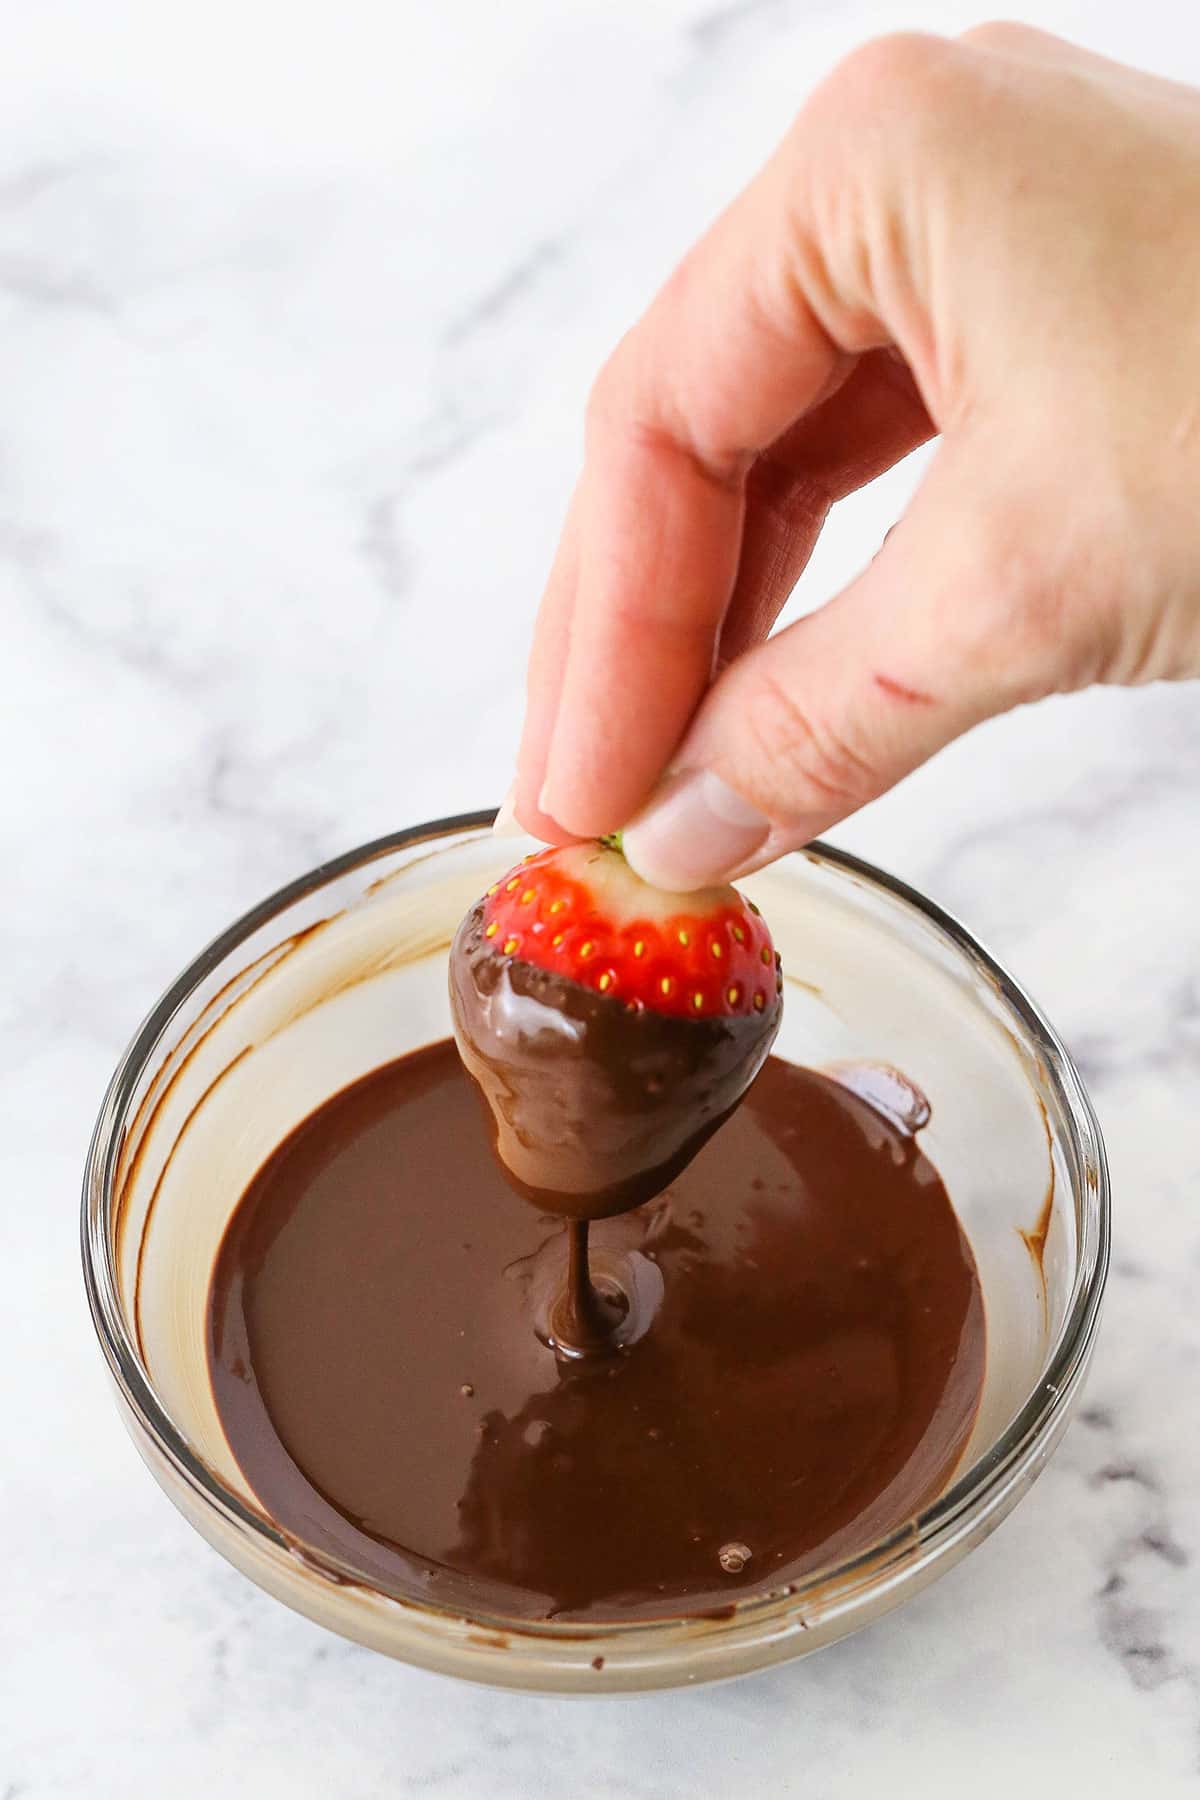 A strawberry being dipped by hand into a glass bowl with melted chocolate